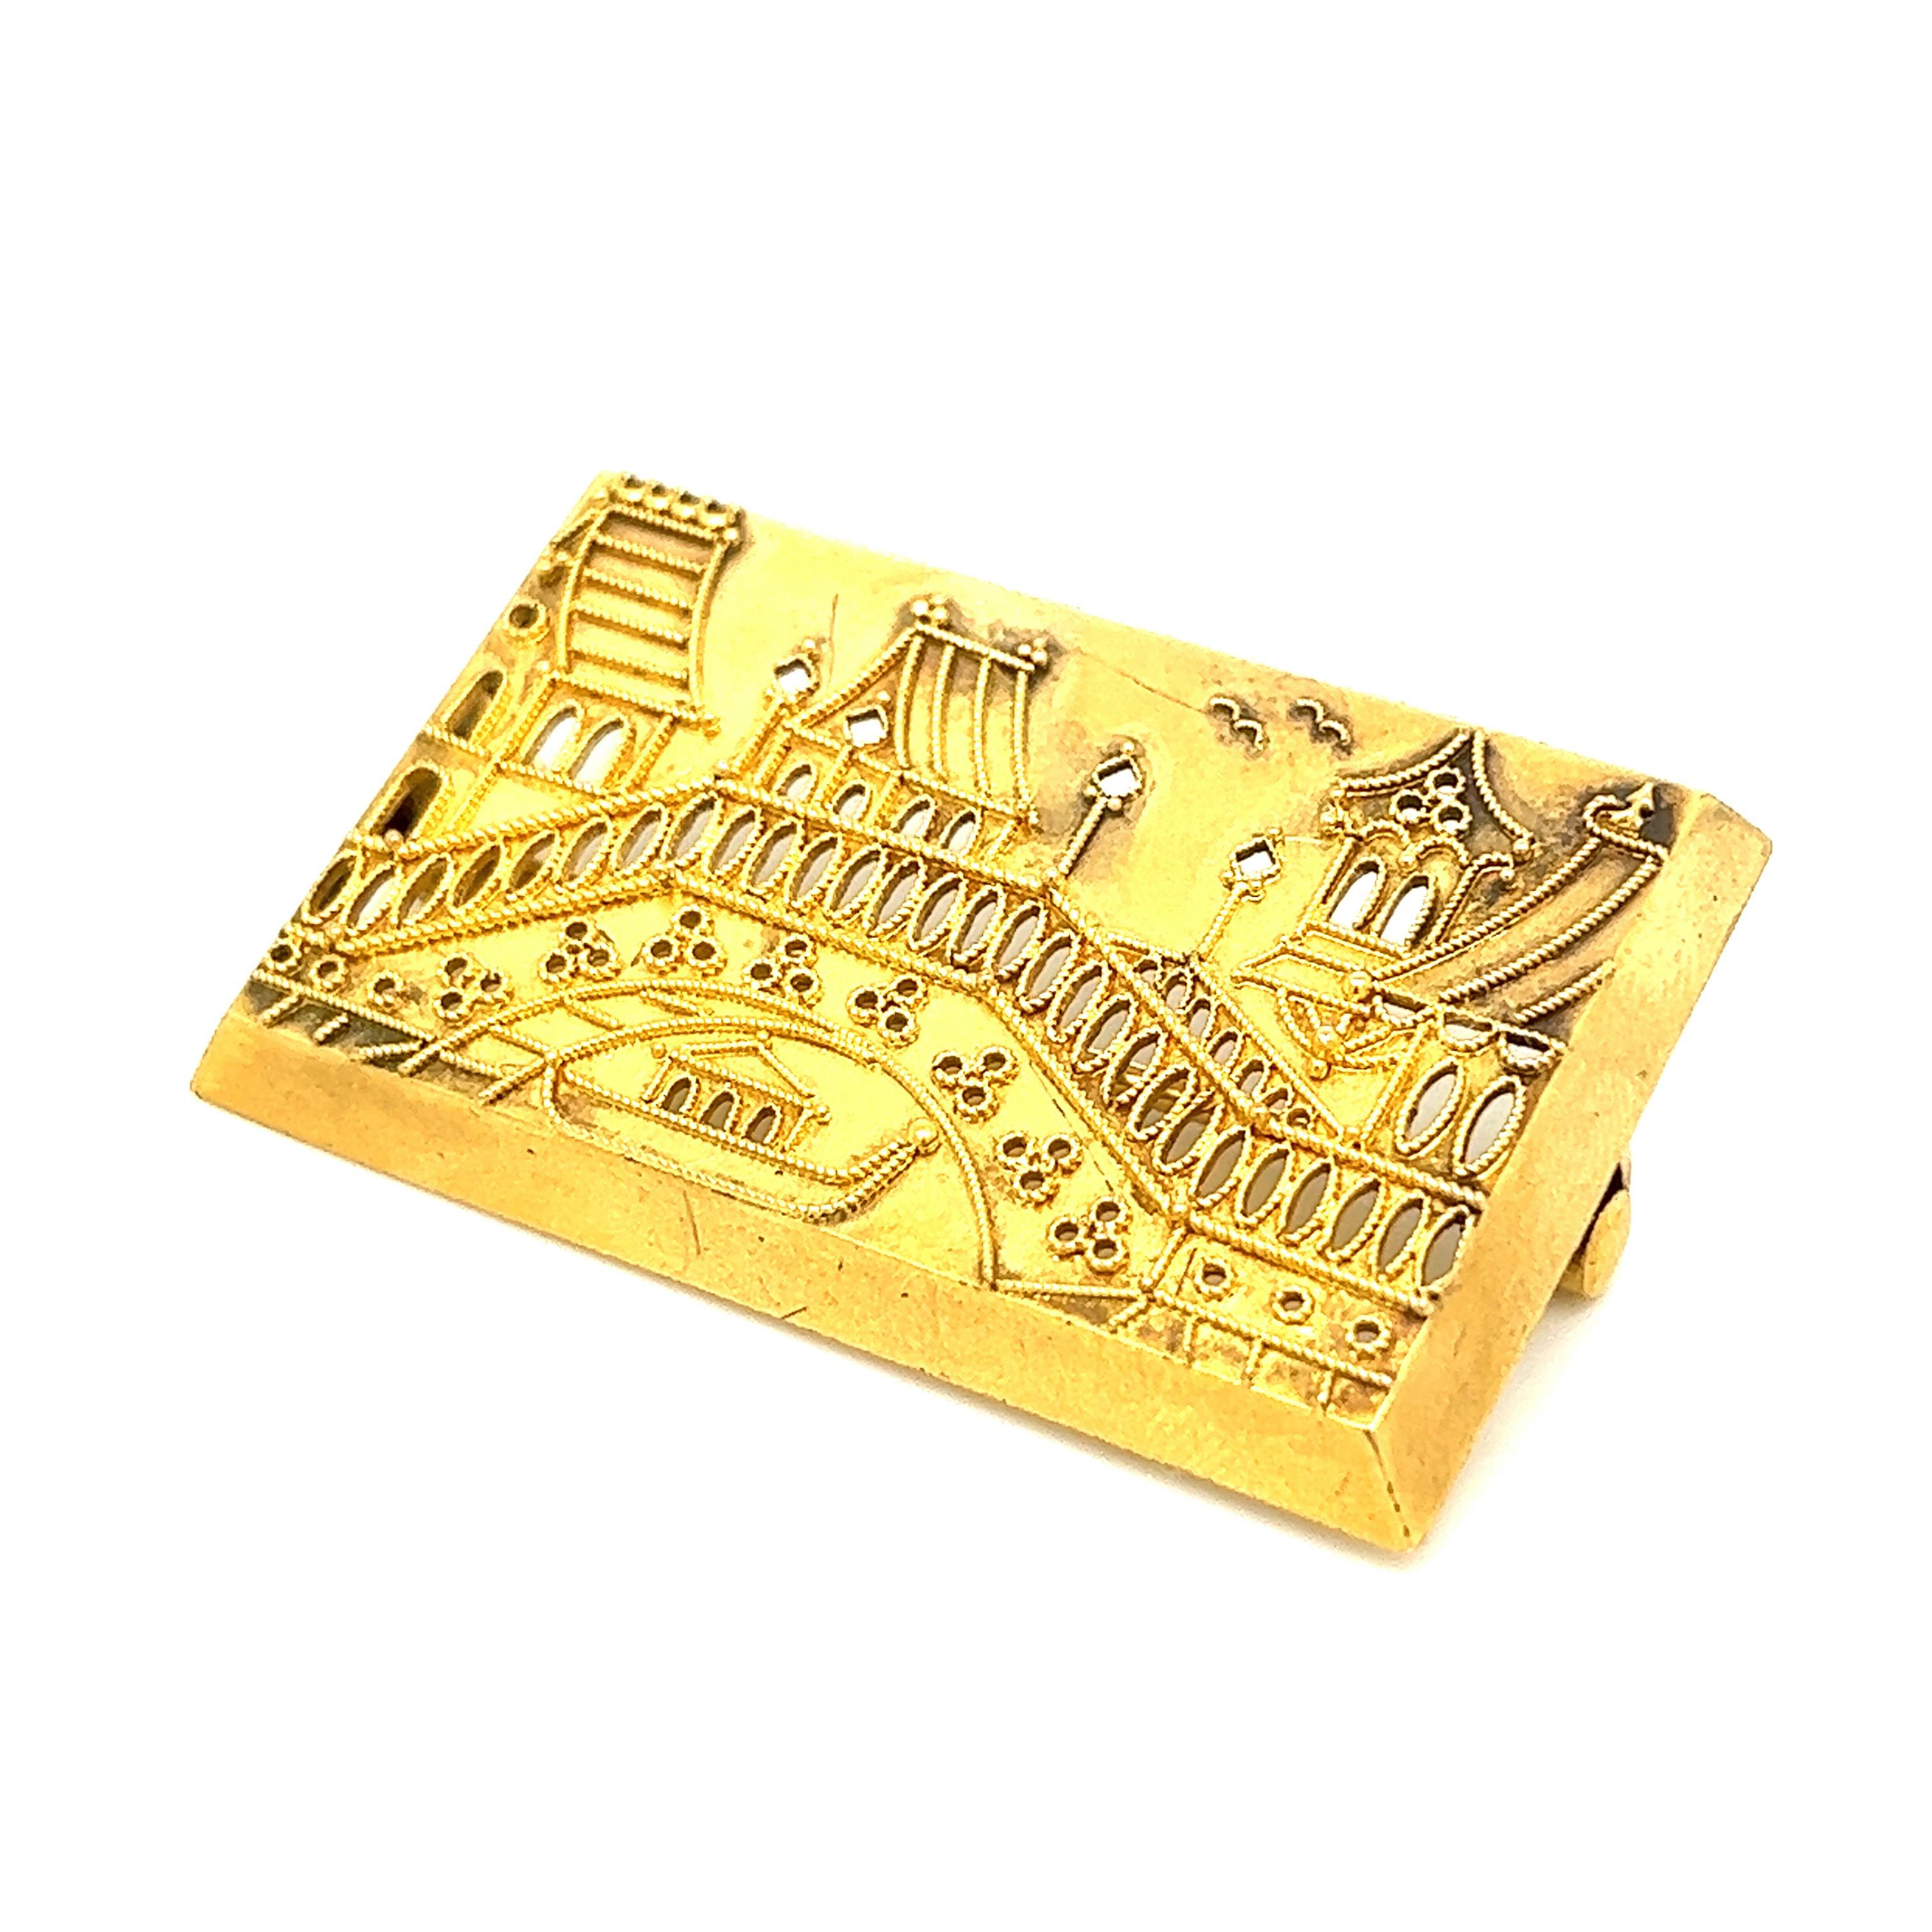 Rectangular gold scenic brooch

Features a scenic view of a town; 14 karat yellow gold 

Size: width 1.75 inches, length 1.13 inches
Total weight: 9.6 grams